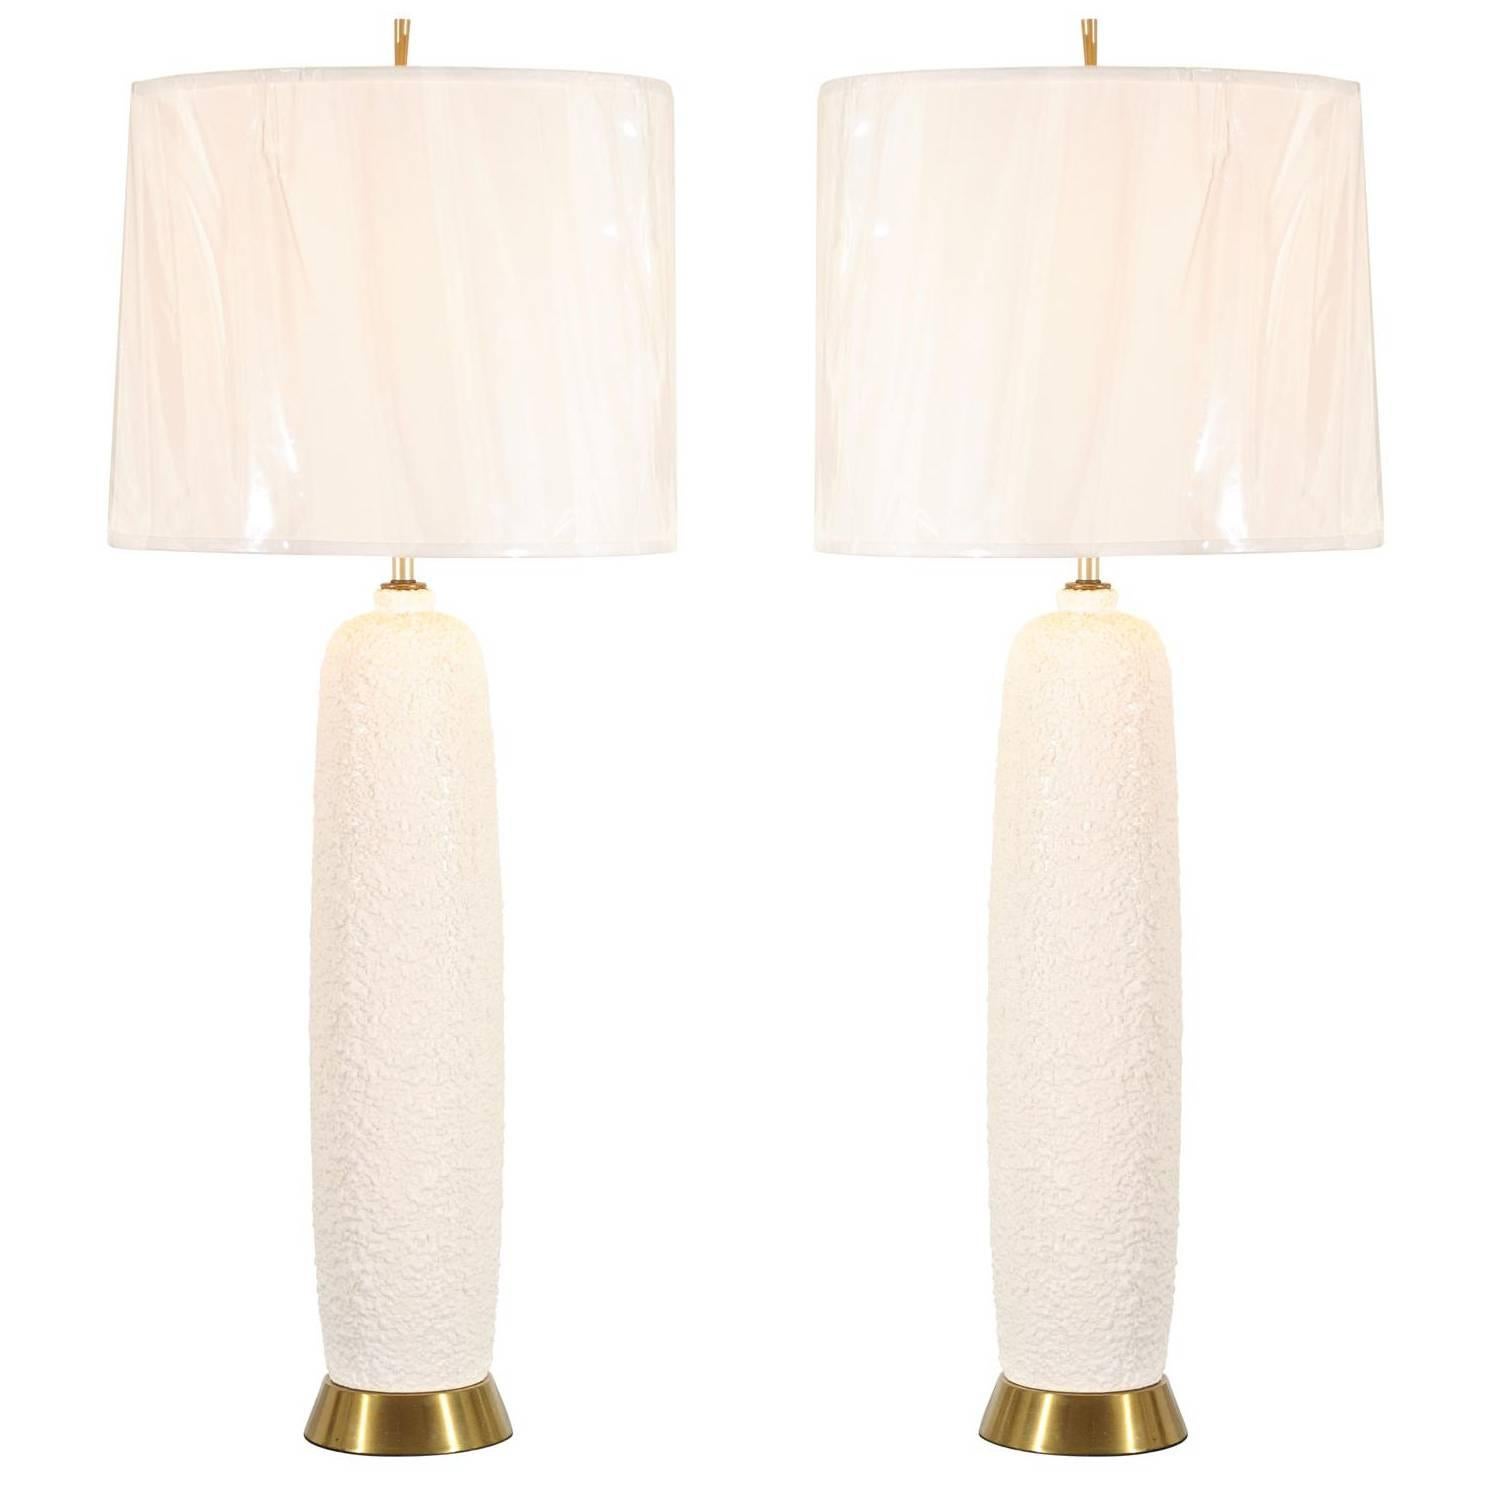 Spectacular Pair of Stippled Porcelain and Brass Lamps, Italy, circa 1960